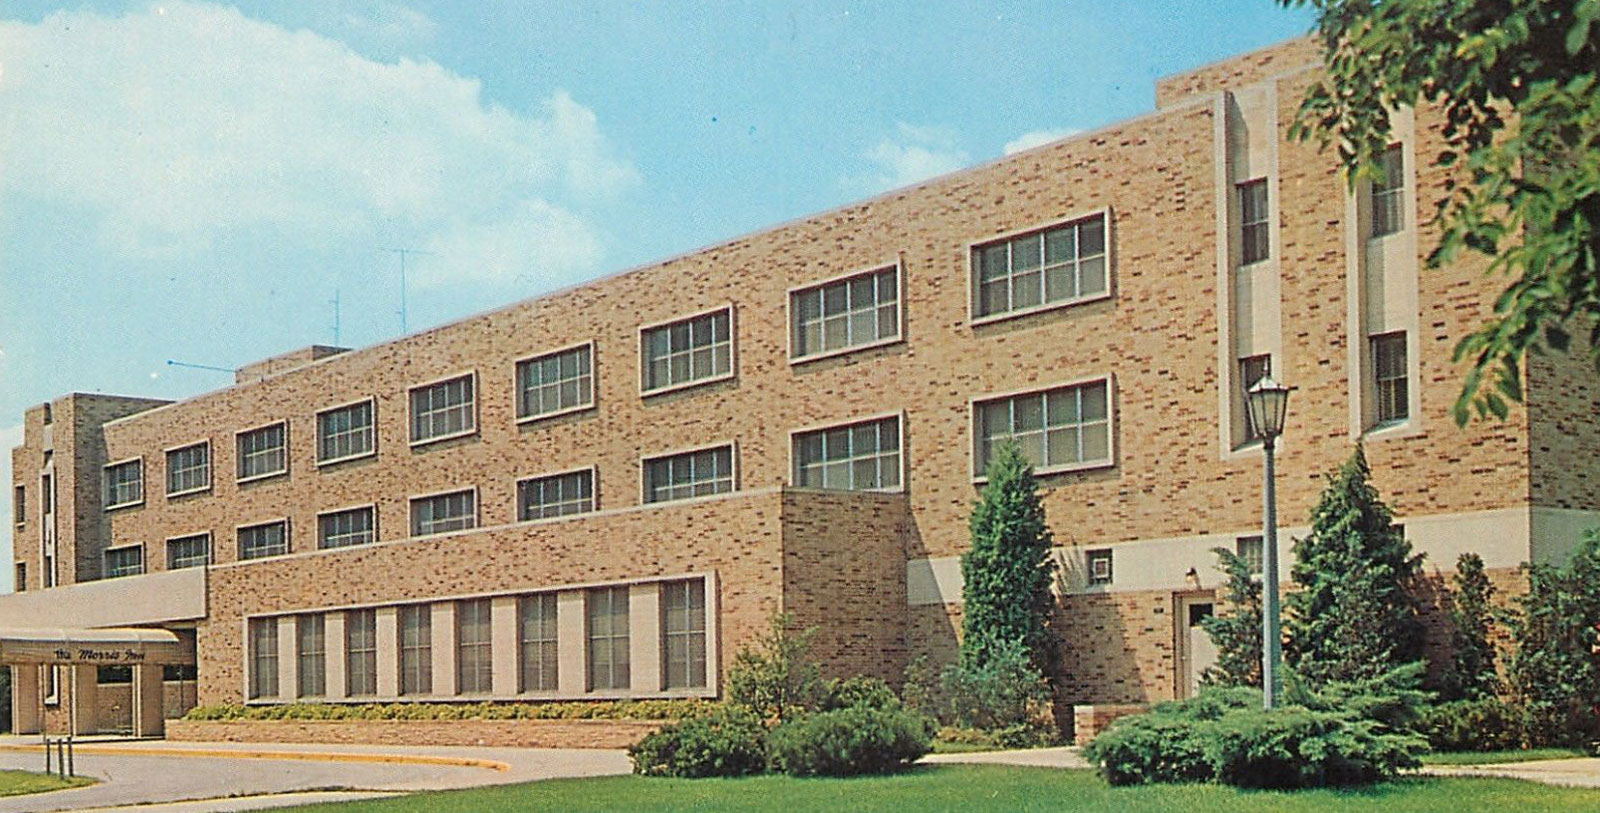 Image of Vintage 1950s Postcard depicting hotel exterior, Morris Inn at Notre Dame in South Bend, Indiana, 1952, Member of Historic Hotels of America, History